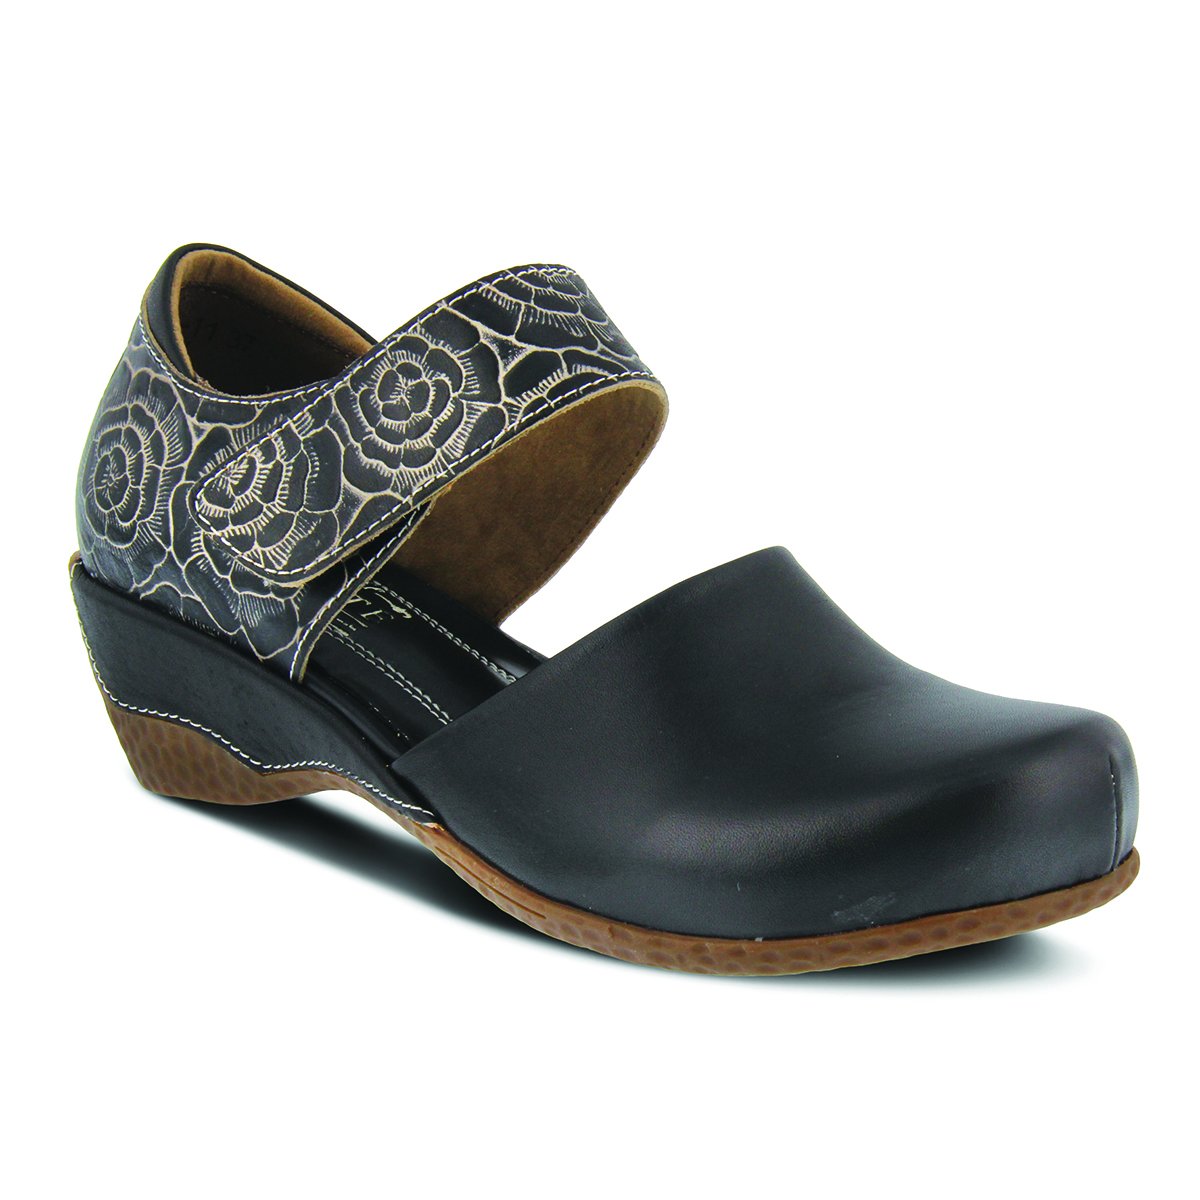 Hand painted leather two-piece Mary-Jane with hooks and loops wide strap fastening. Beautiful floral two-tone leather quarters with padded heel topline. Style name is Gloss-Pansy Mary Jane Shoe by L'Artiste Springstep Footwear